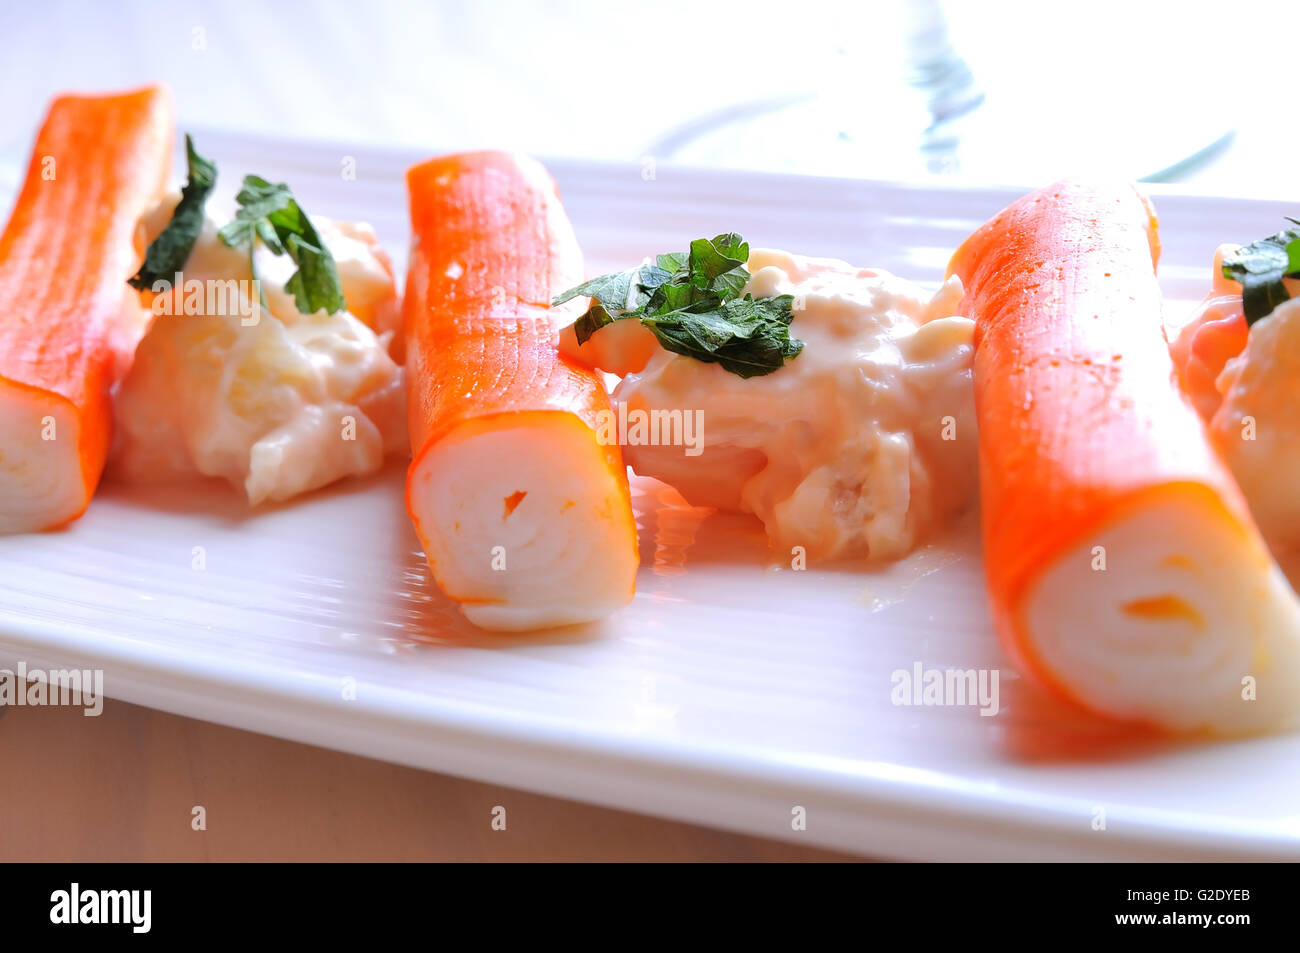 Surimi sticks with sauce on a white plate on a white wooden table front view Stock Photo